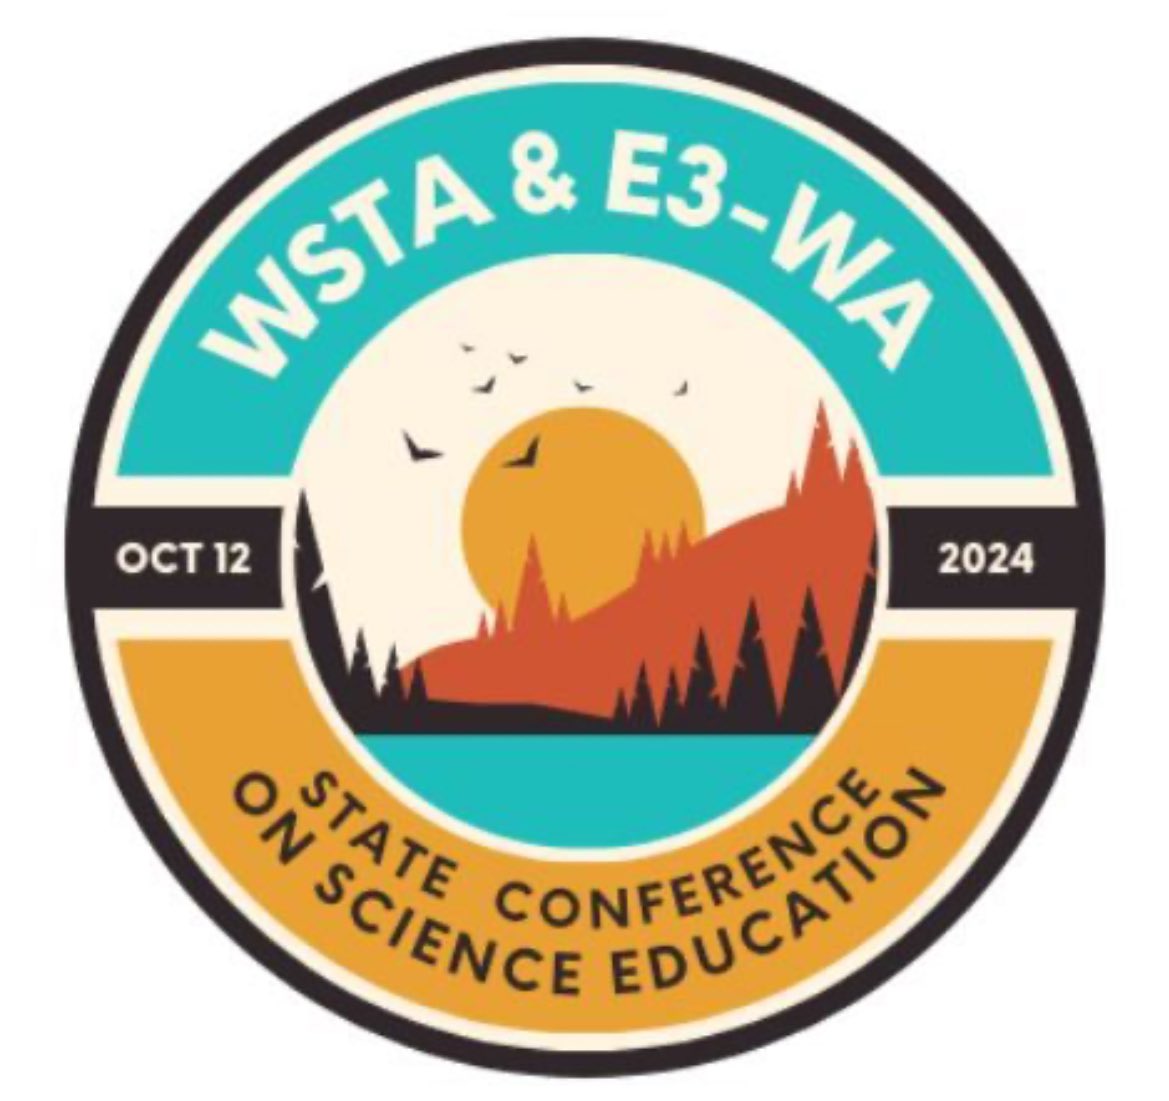 Calling all #science education presenters! The Washington Science Teachers Association is accepting proposals for in person and VIRTUAL presenters! Zoom in from your home and share your knowledge or join us in Spokane, all on October 12th. #WSTA24 docs.google.com/forms/d/e/1FAI…